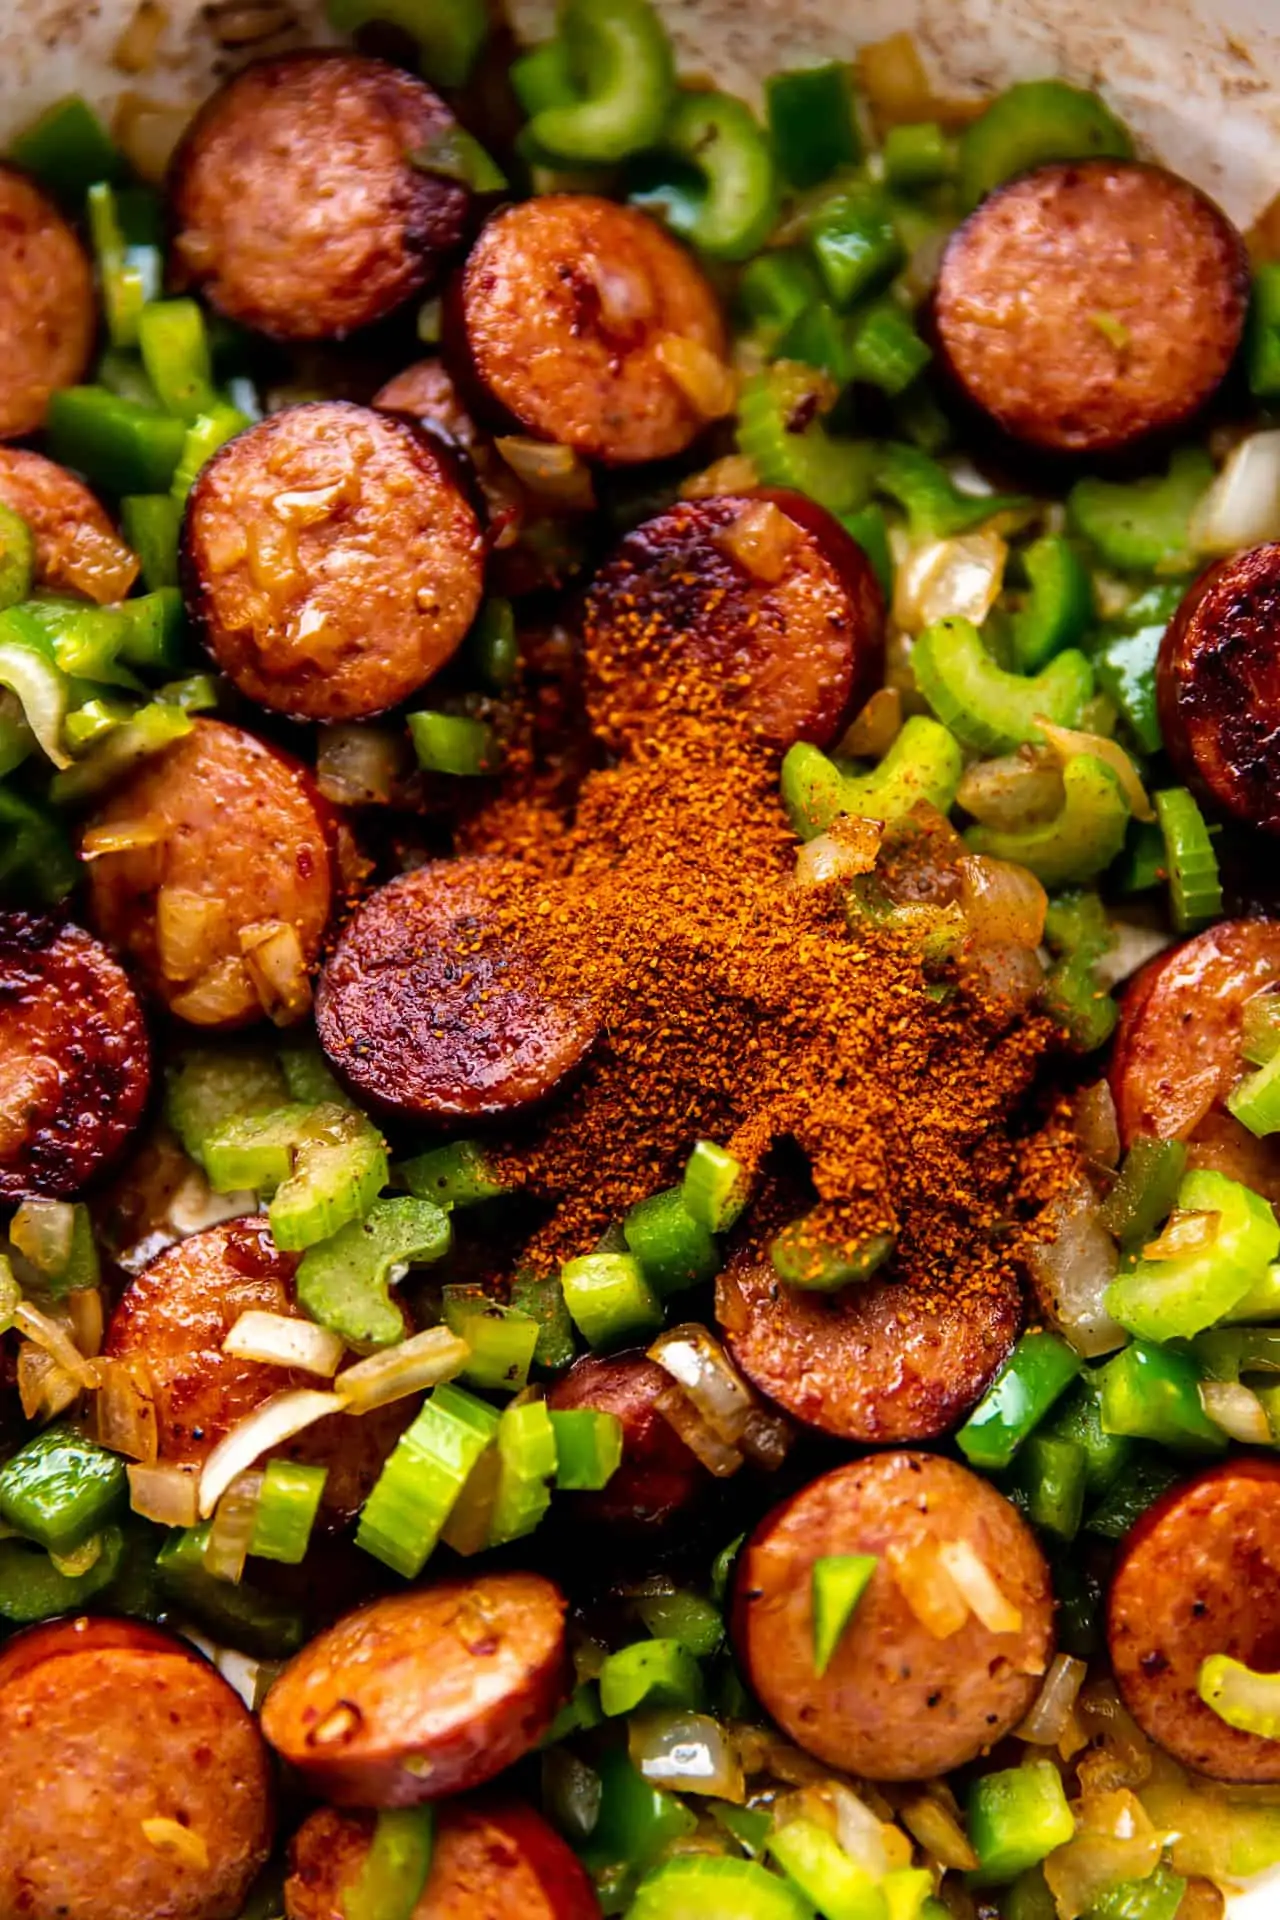 How to make red beans and rice showing cooked sausage and veggies with seasonings added. 